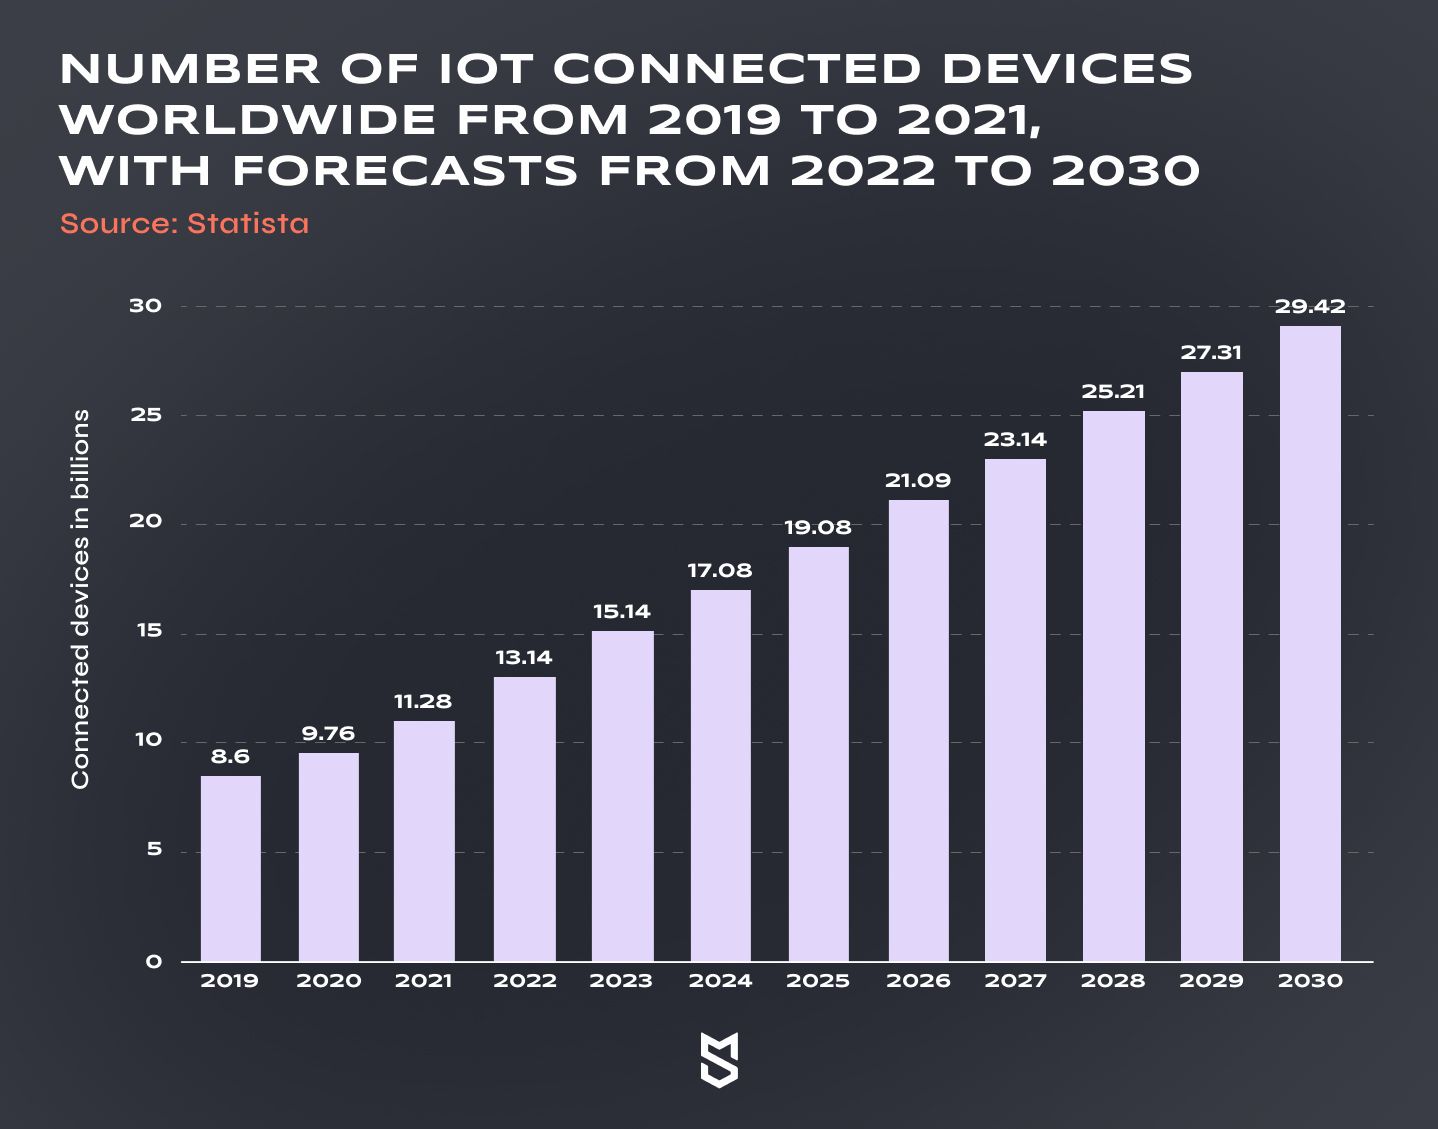 Number of IoT connected devices worldwide from 2019 to 2021, with forecasts from 2022 to 2030